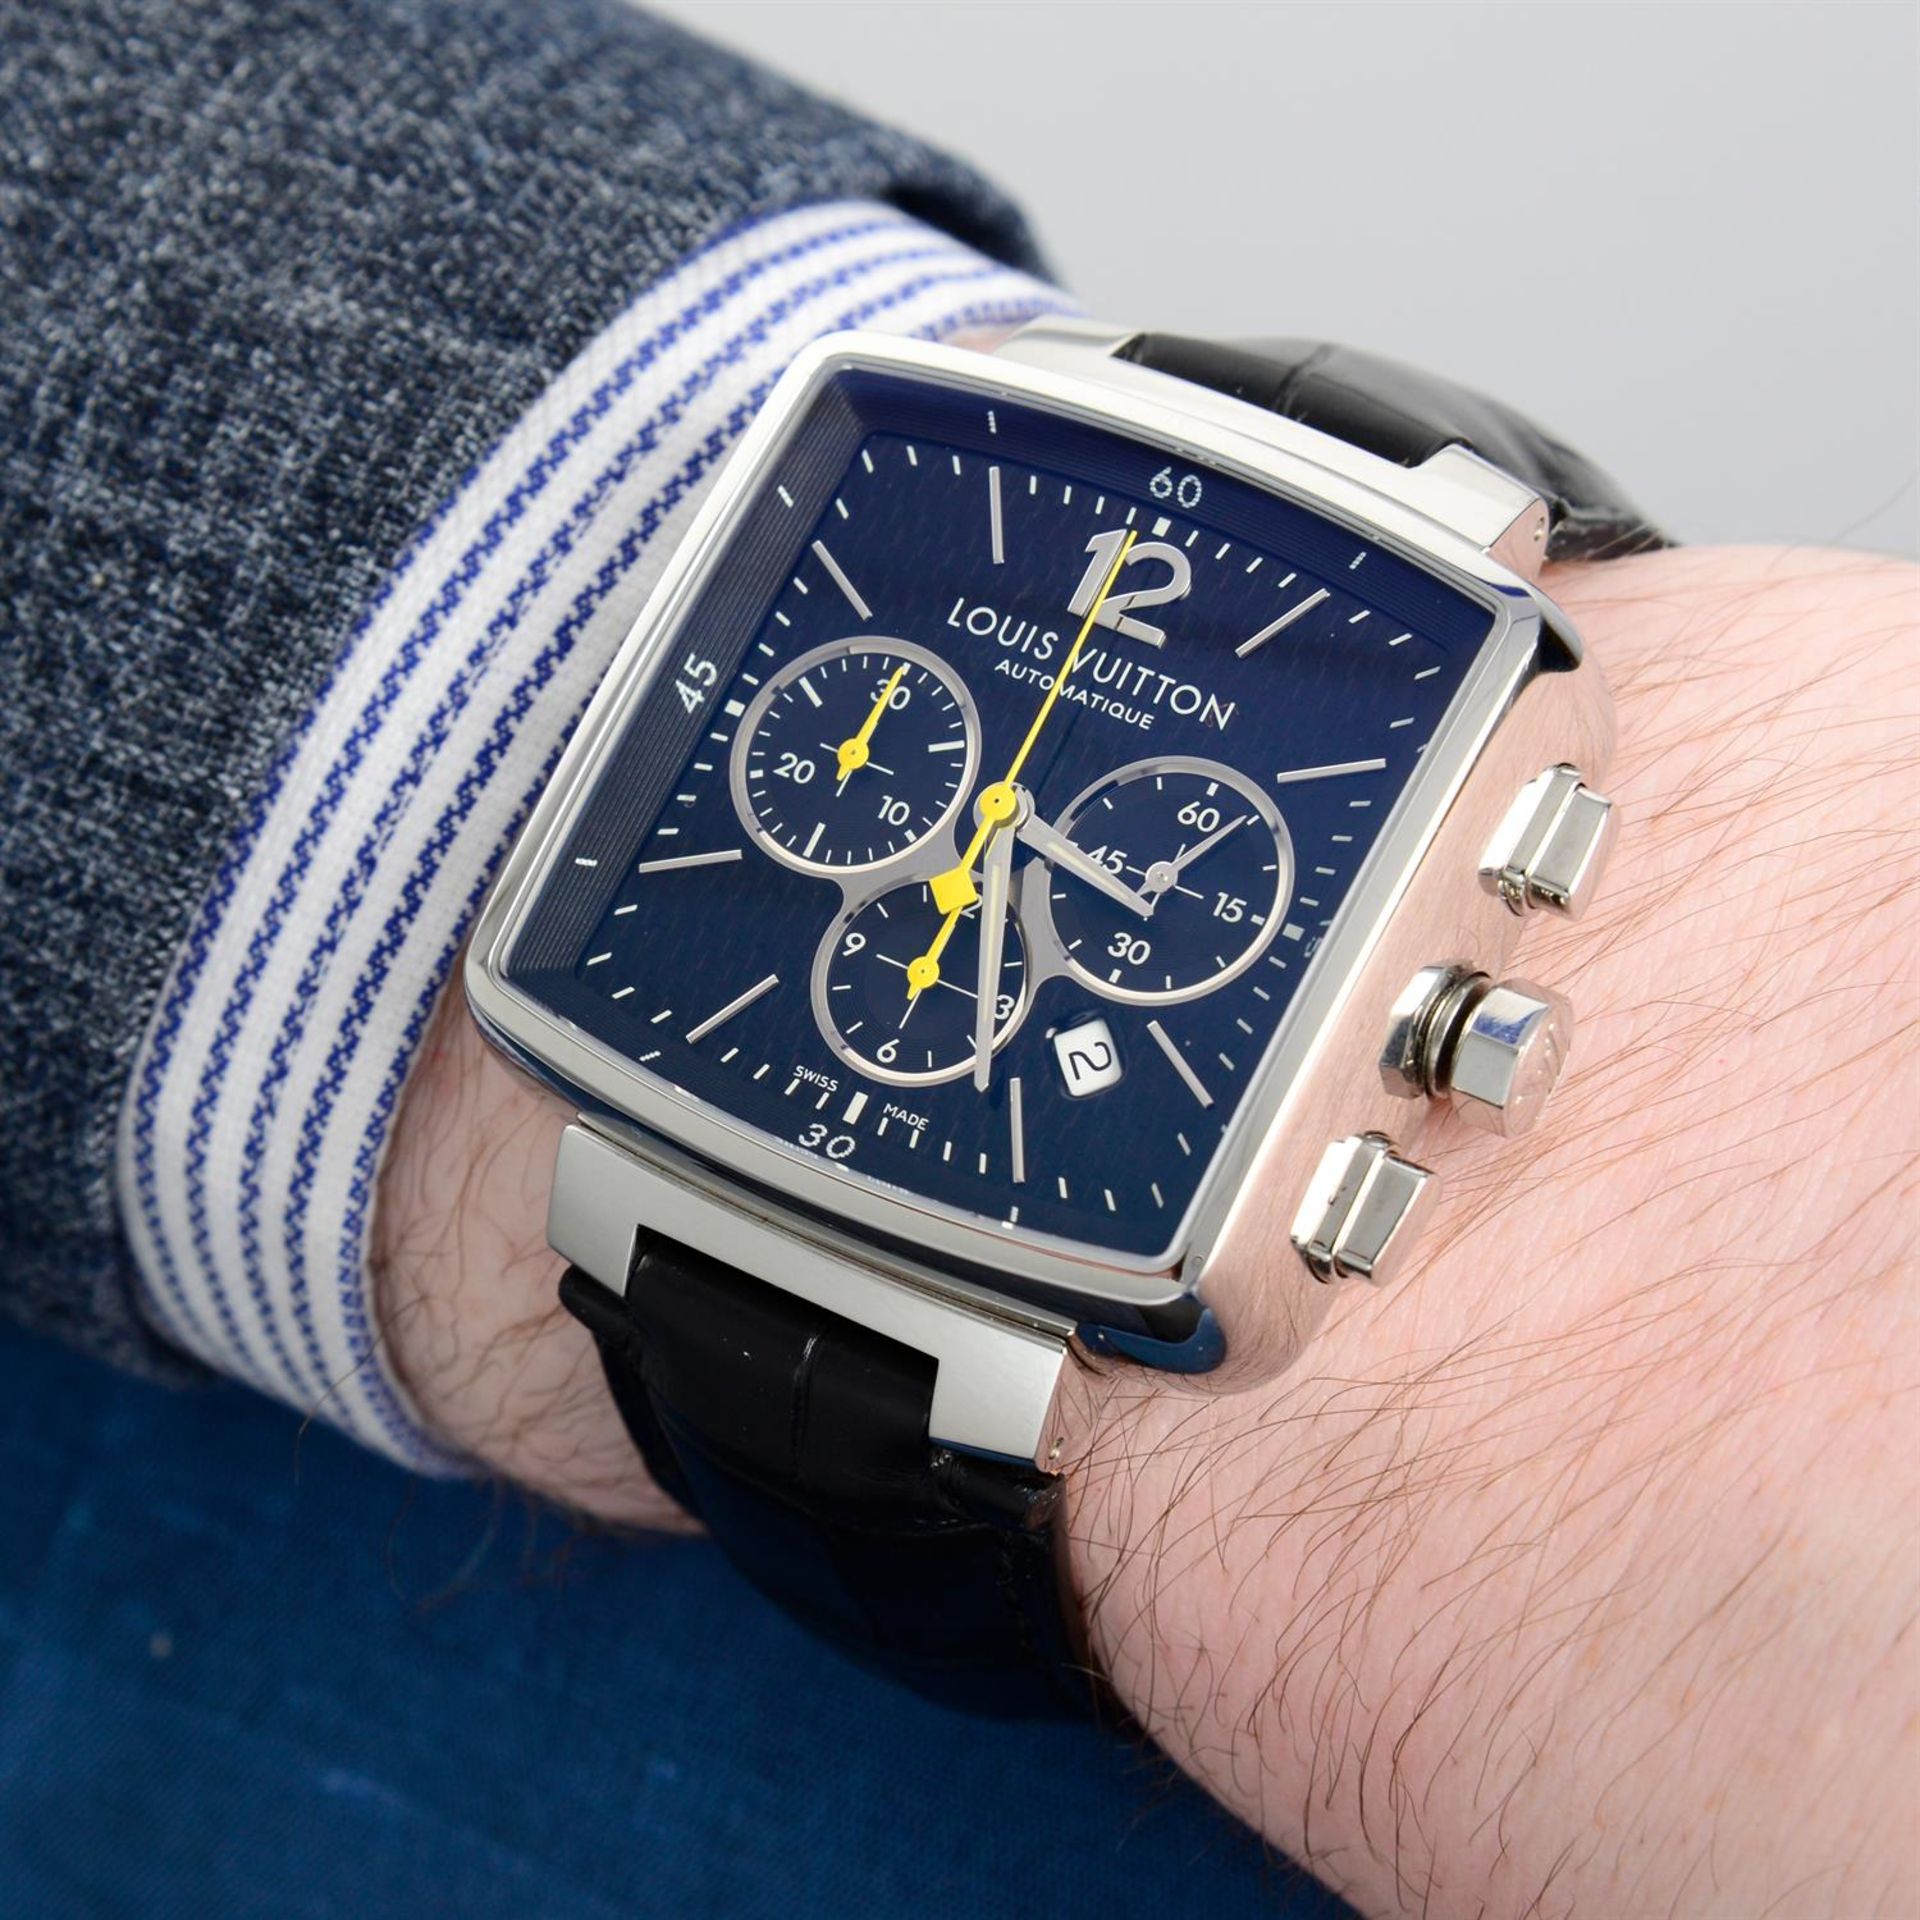 Louis Vuitton - a Speedy chronograph watch, 41x41mm. - Image 5 of 6